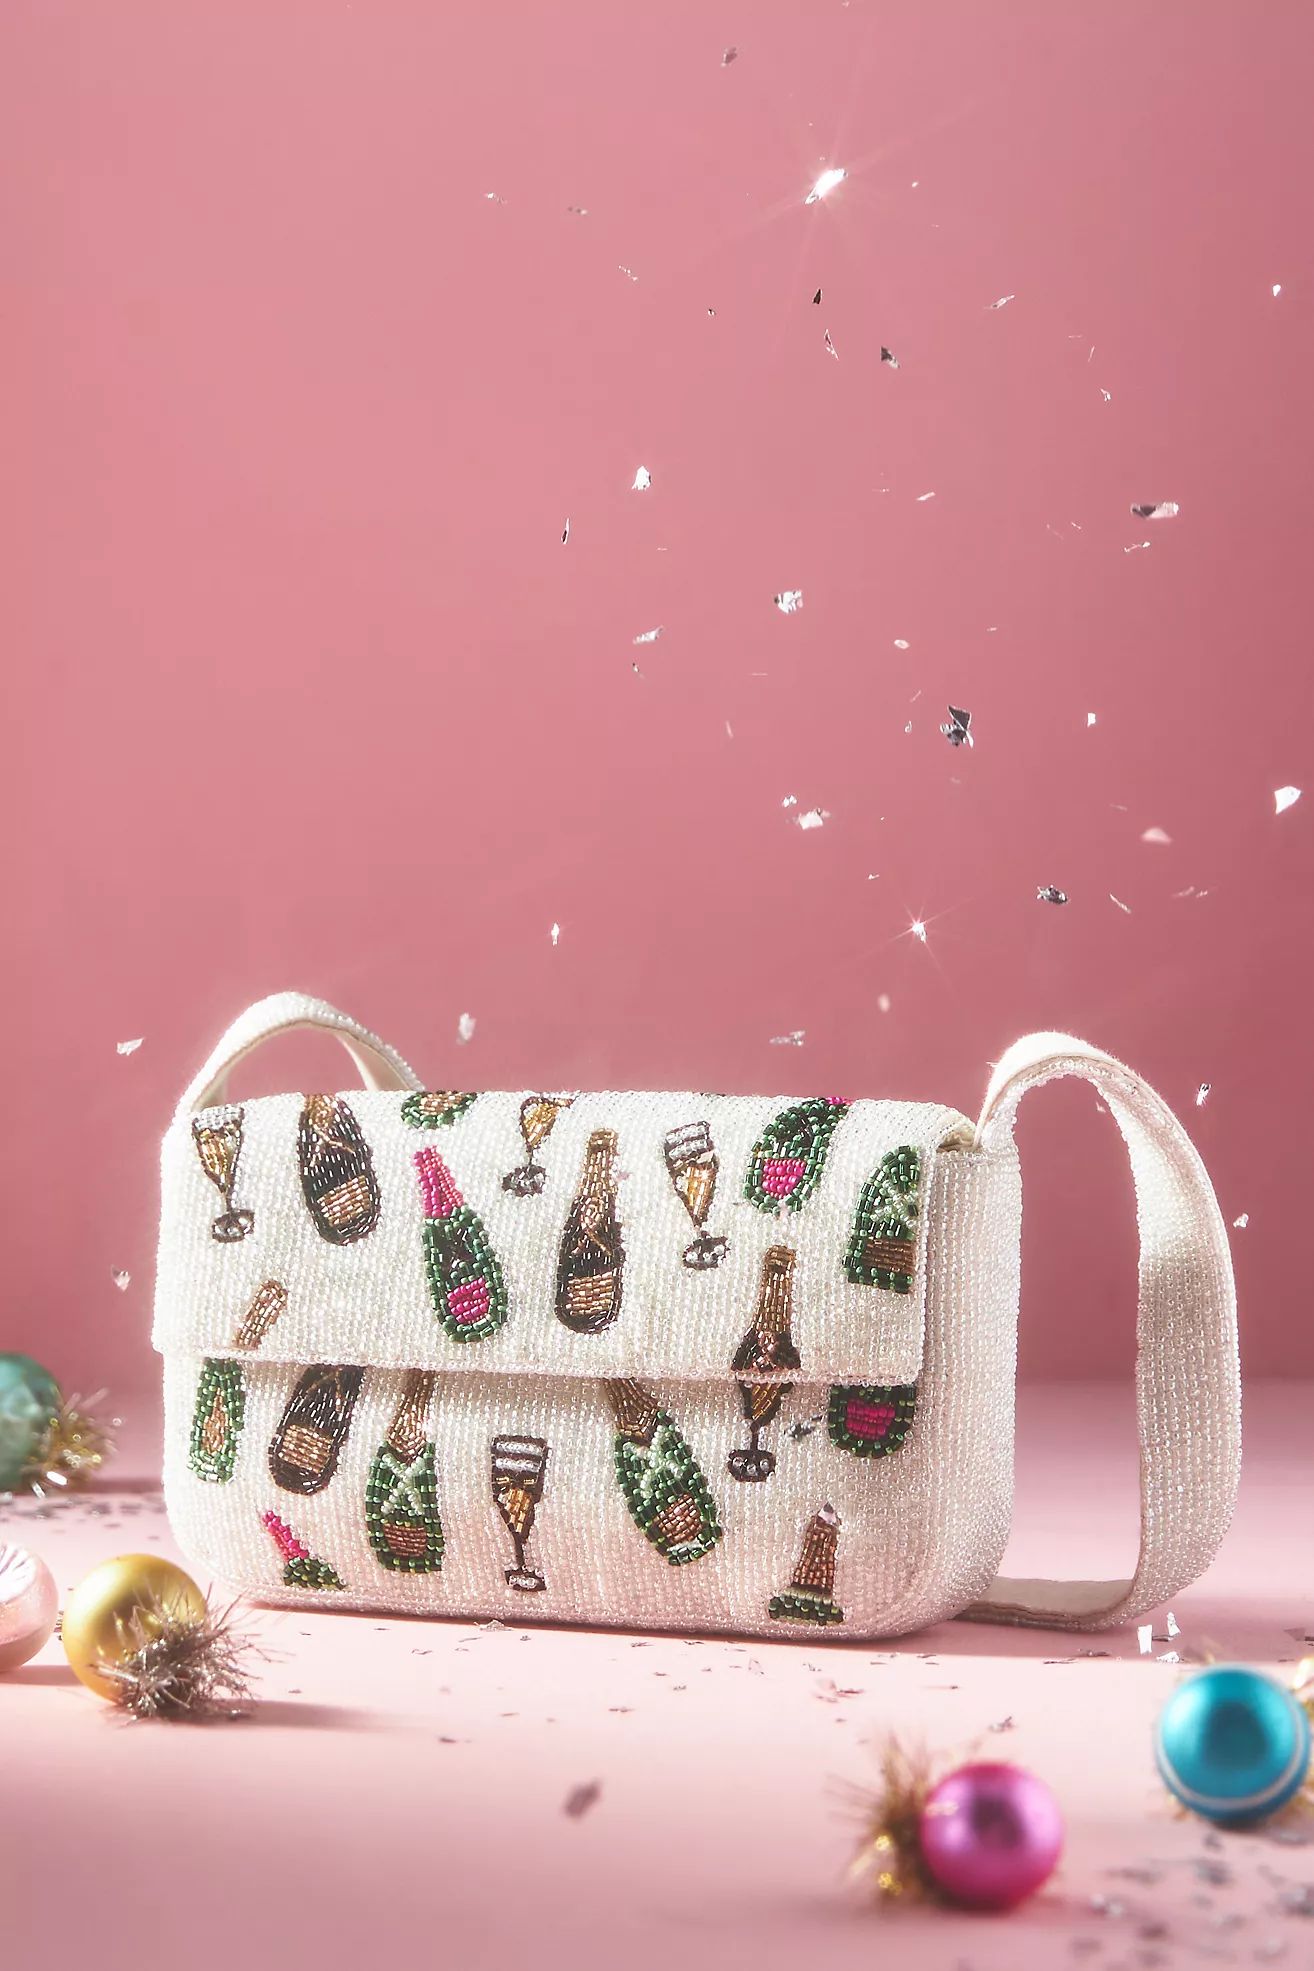 The Fiona Beaded Bag: Party Edition | Anthropologie (US)